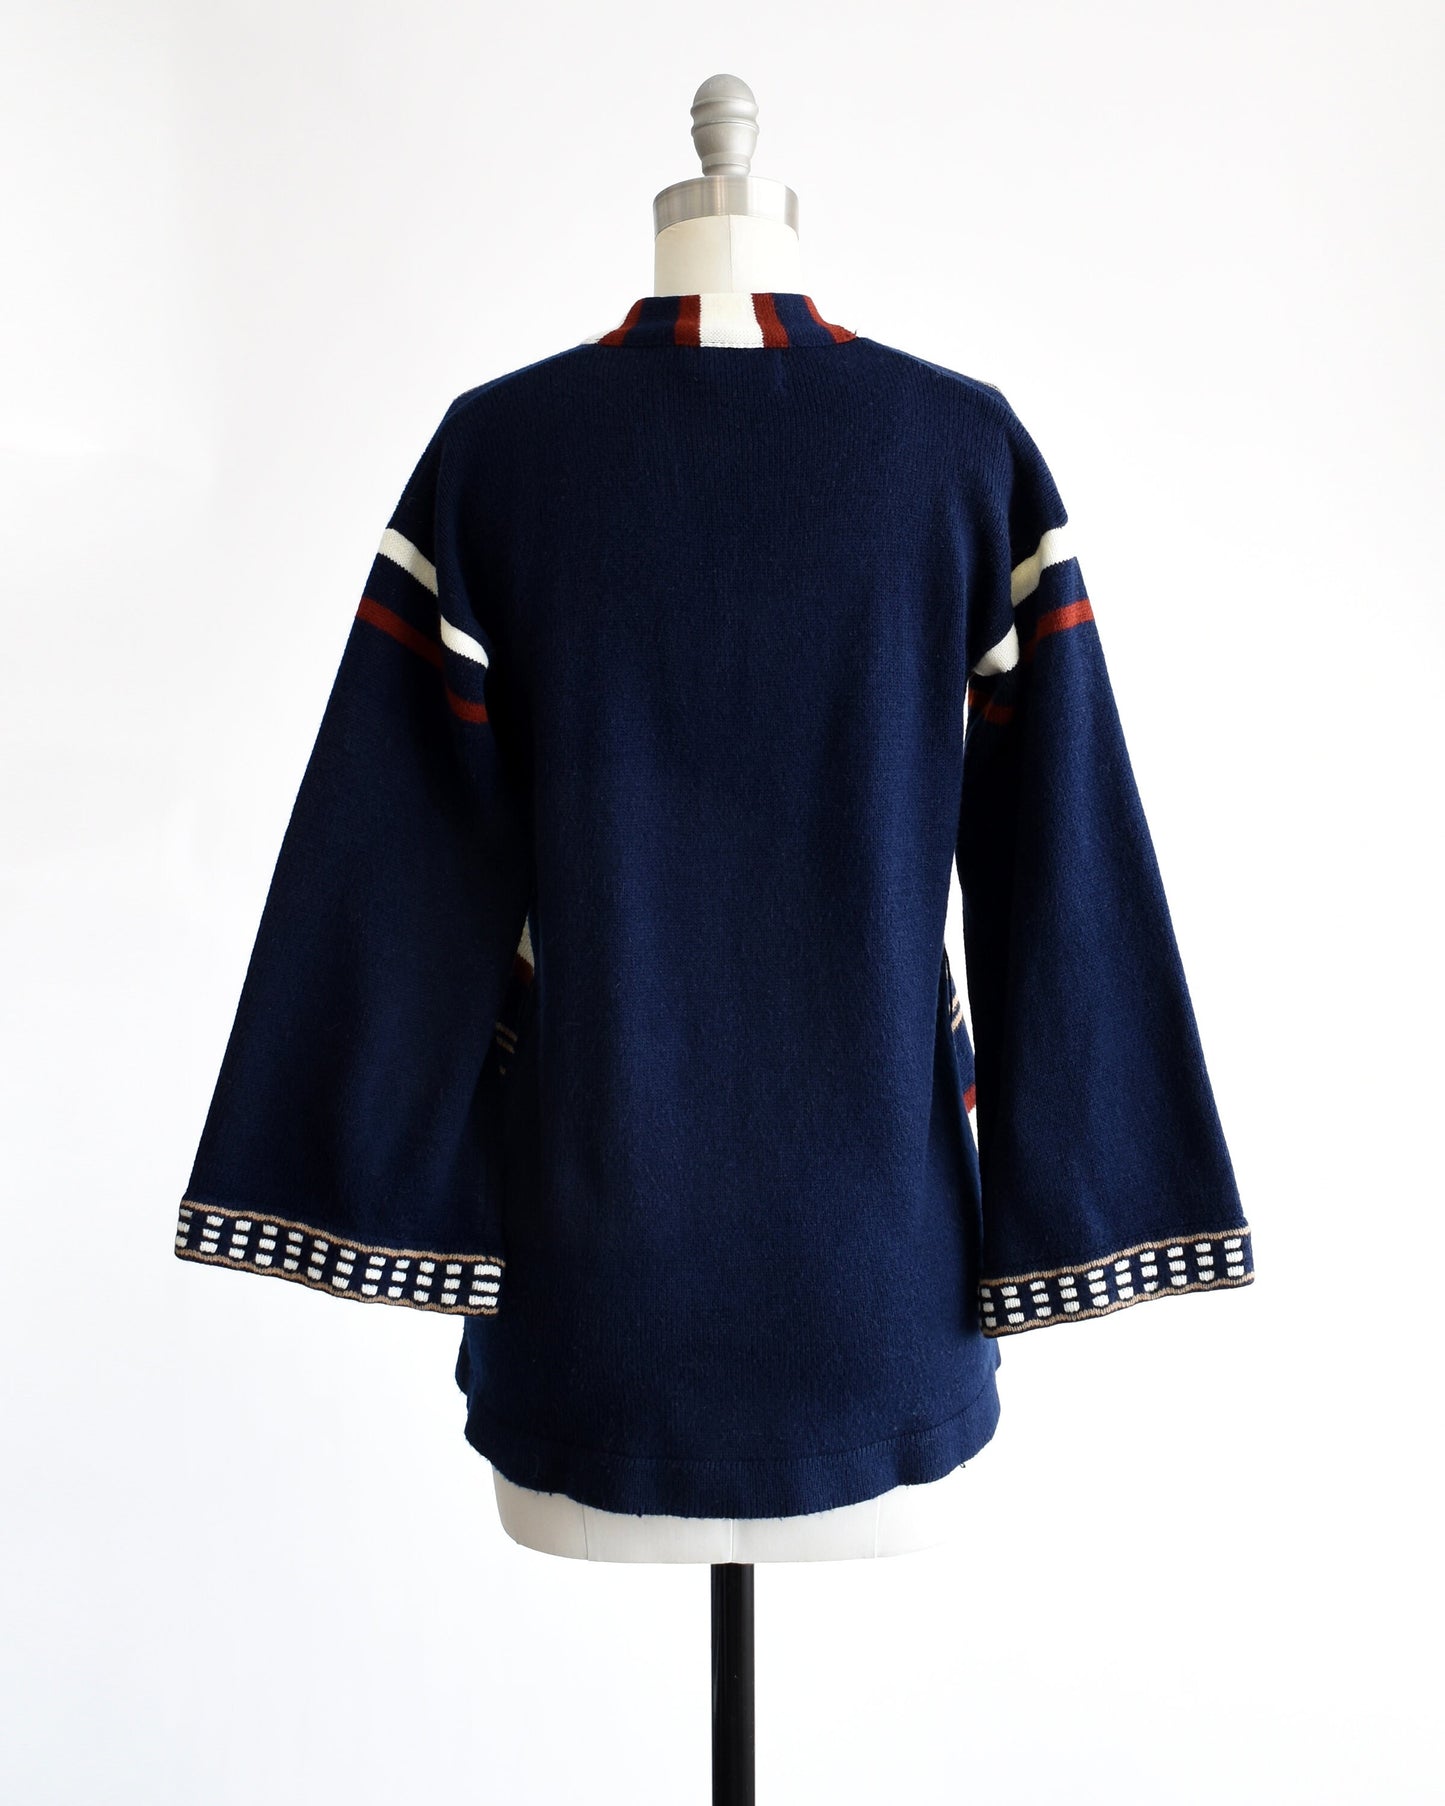 Back view of a vintage 70s navy blue, tan, reddish brown, and white striped bell sleeve open cardigan on a dress form.